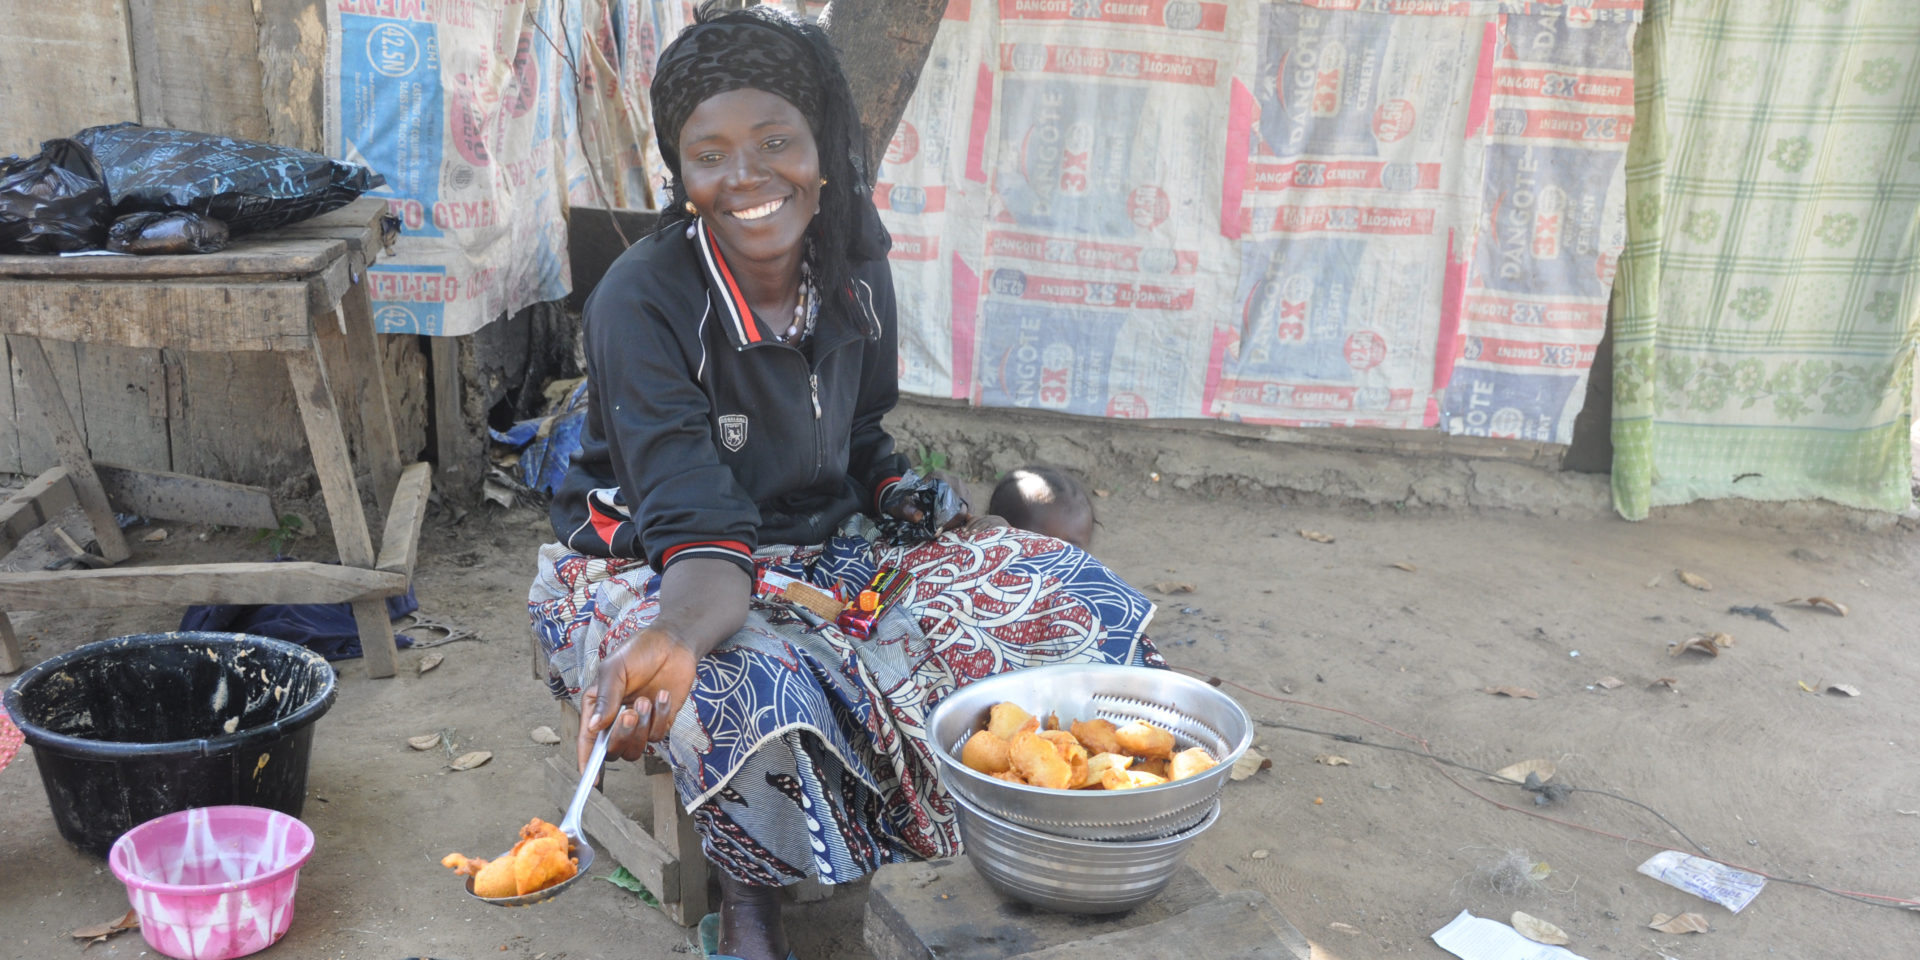 Image of a smiling woman sitting beside a bowl of fried food and offering some to someone off-camera with a large spoon.